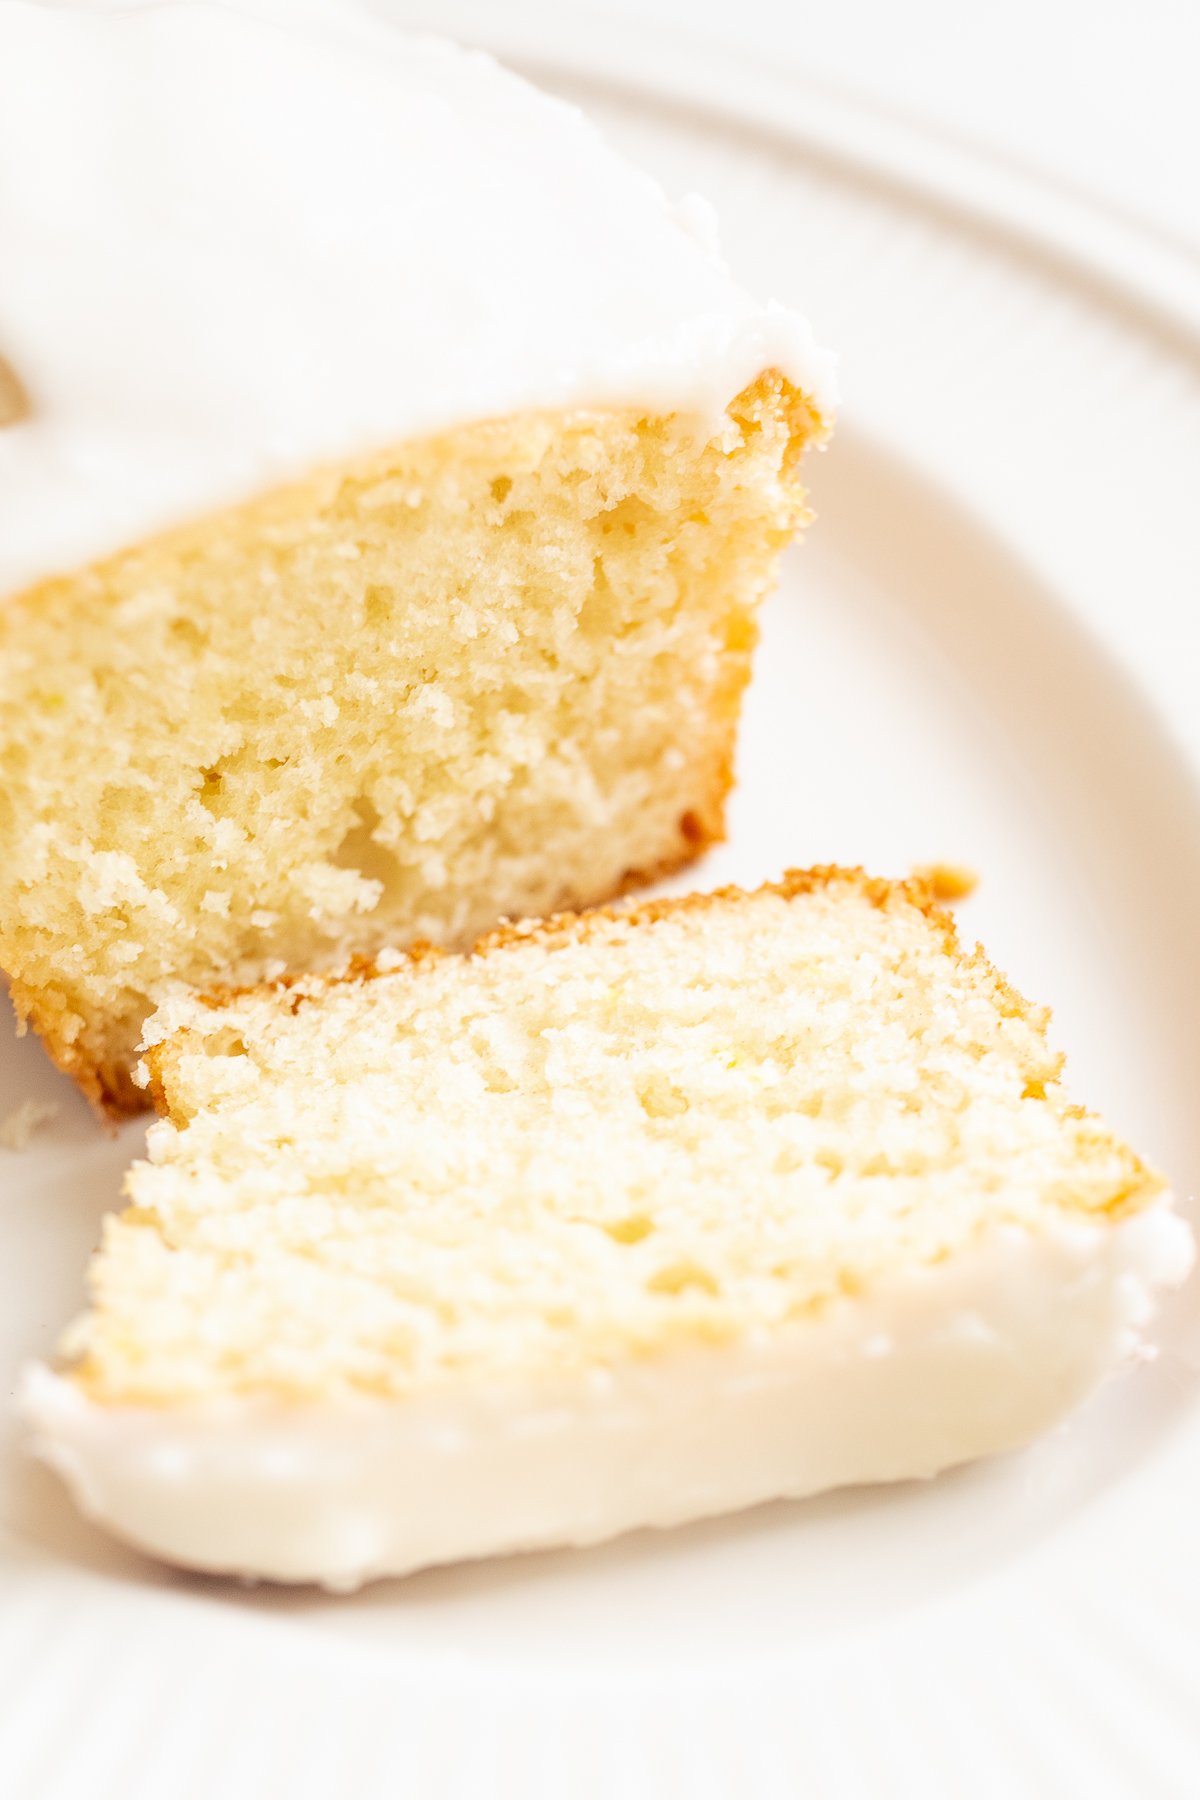 A slice of lemon breadwith lemon glaze icing on a plate, showing a moist crumb with a piece cut off.